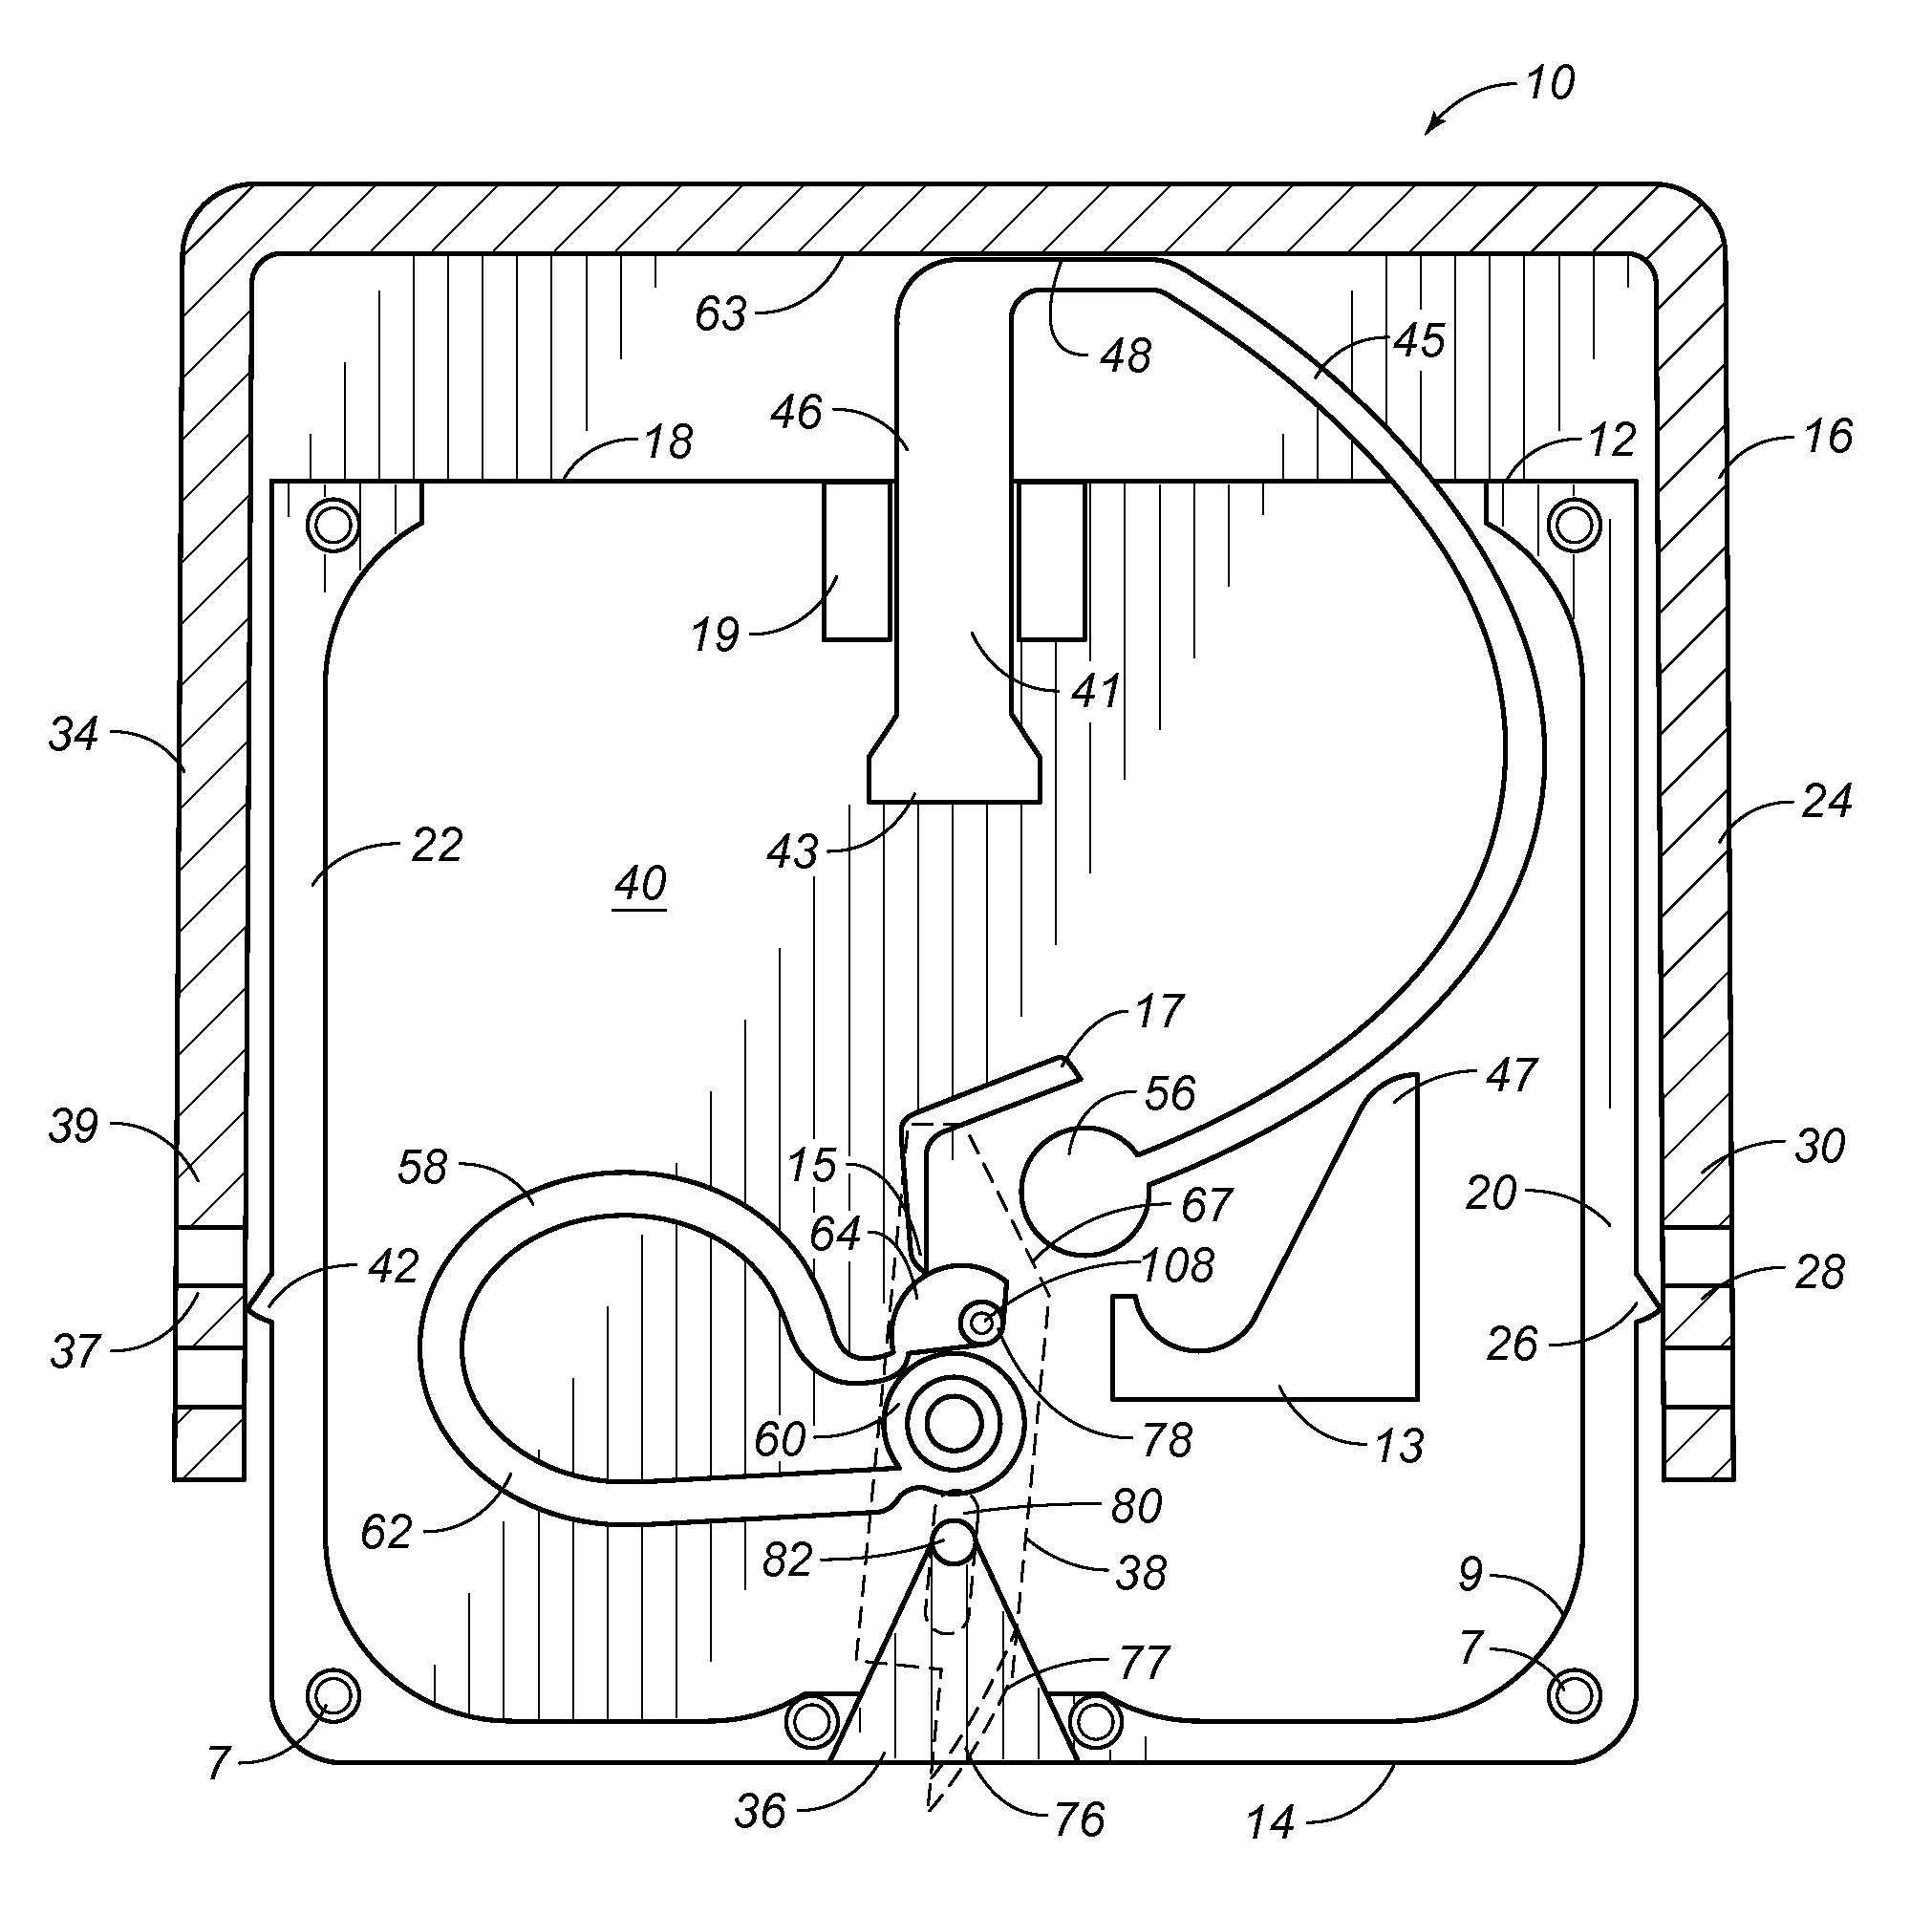 Load-controlled device for a patterned skin incision of constant depth